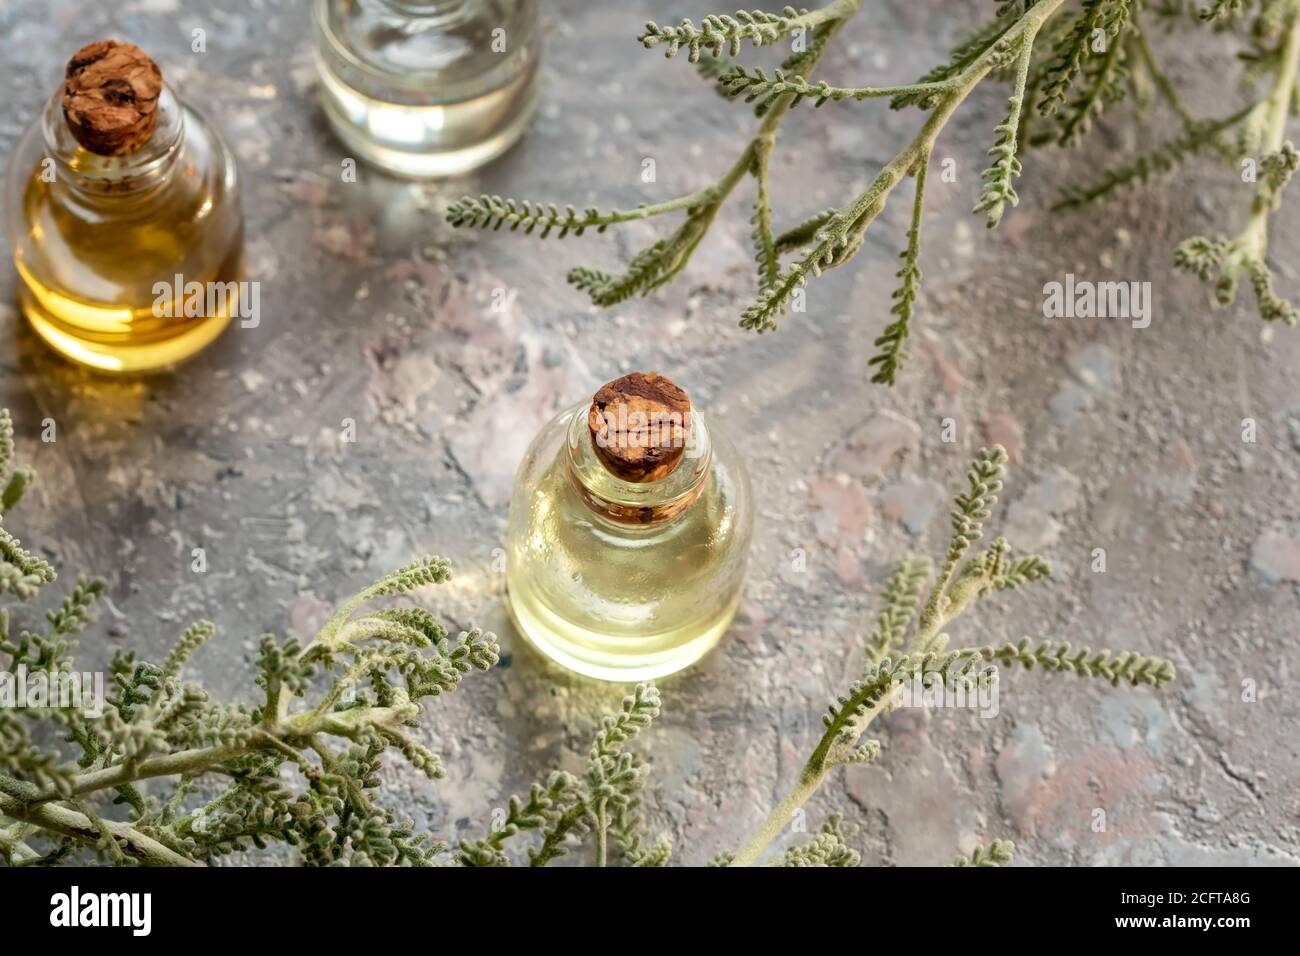 A bottle of essential oil with Santolina chamaecyparissus twigs Stock Photo